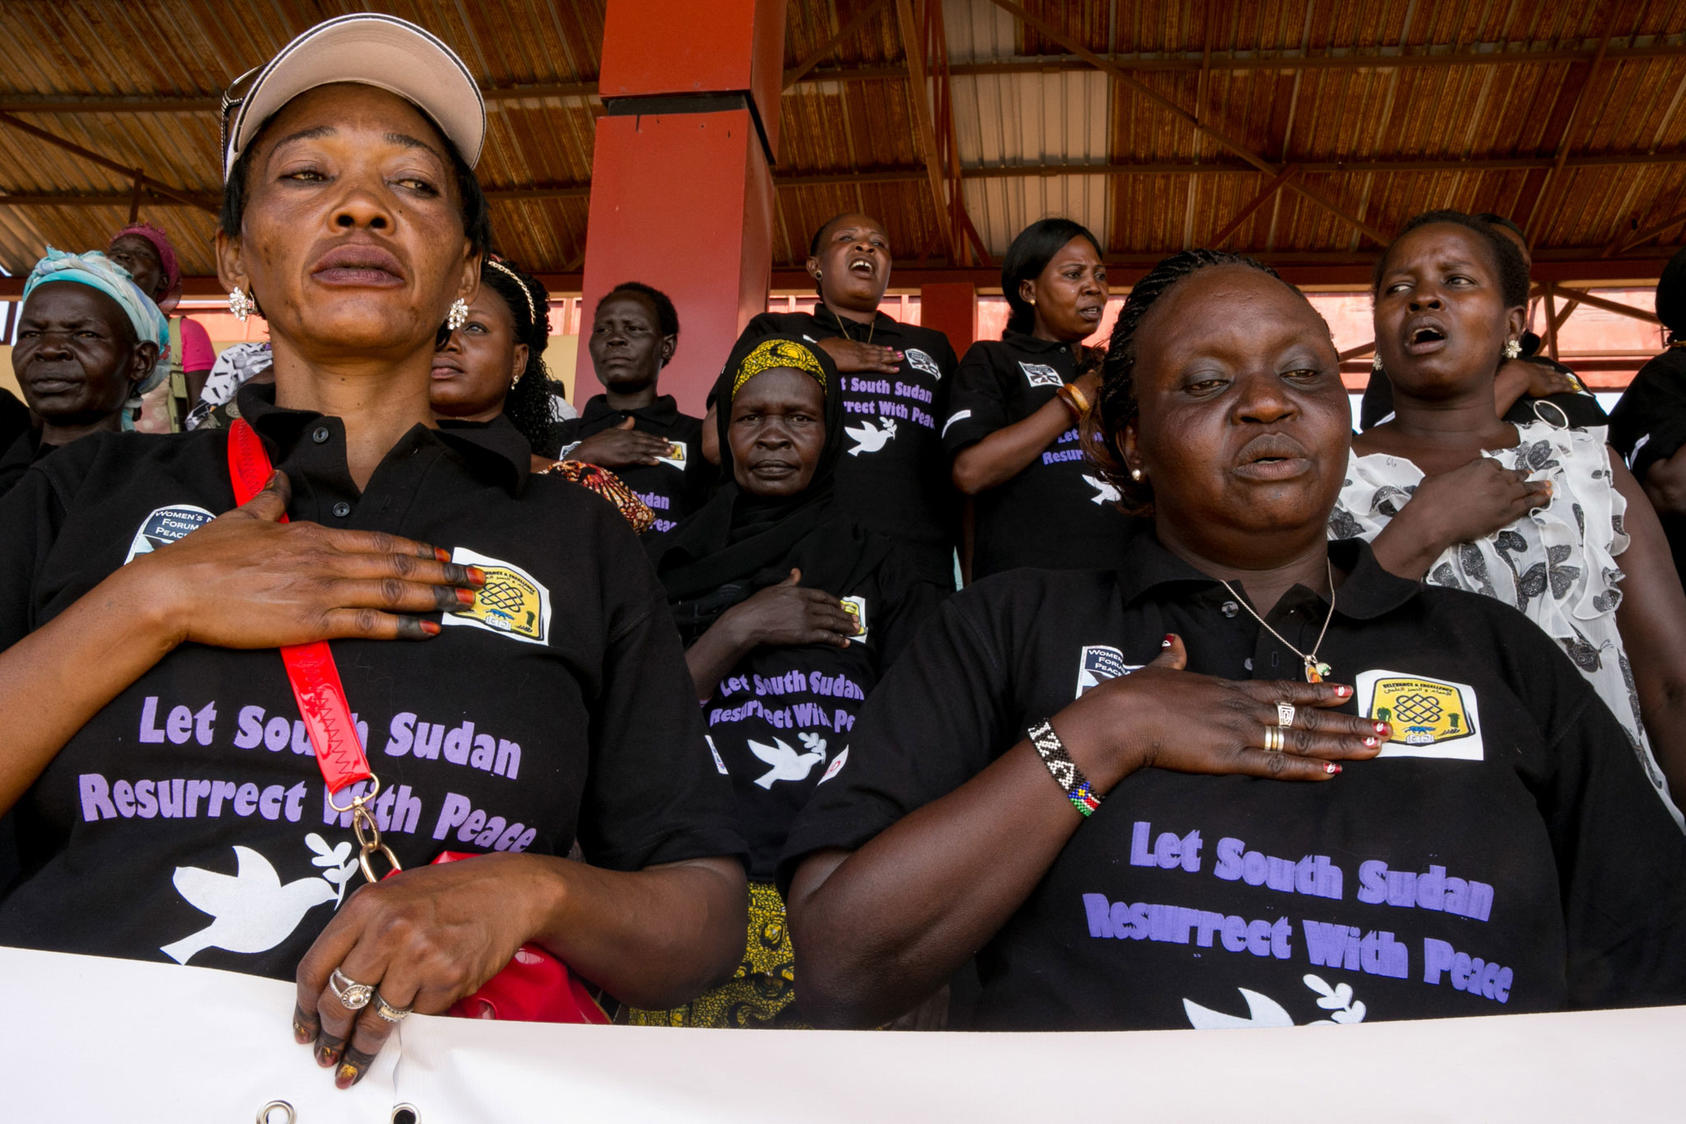 South Sudanese women call leadership to recommit to peace (UNMISS/Isaac Billy)